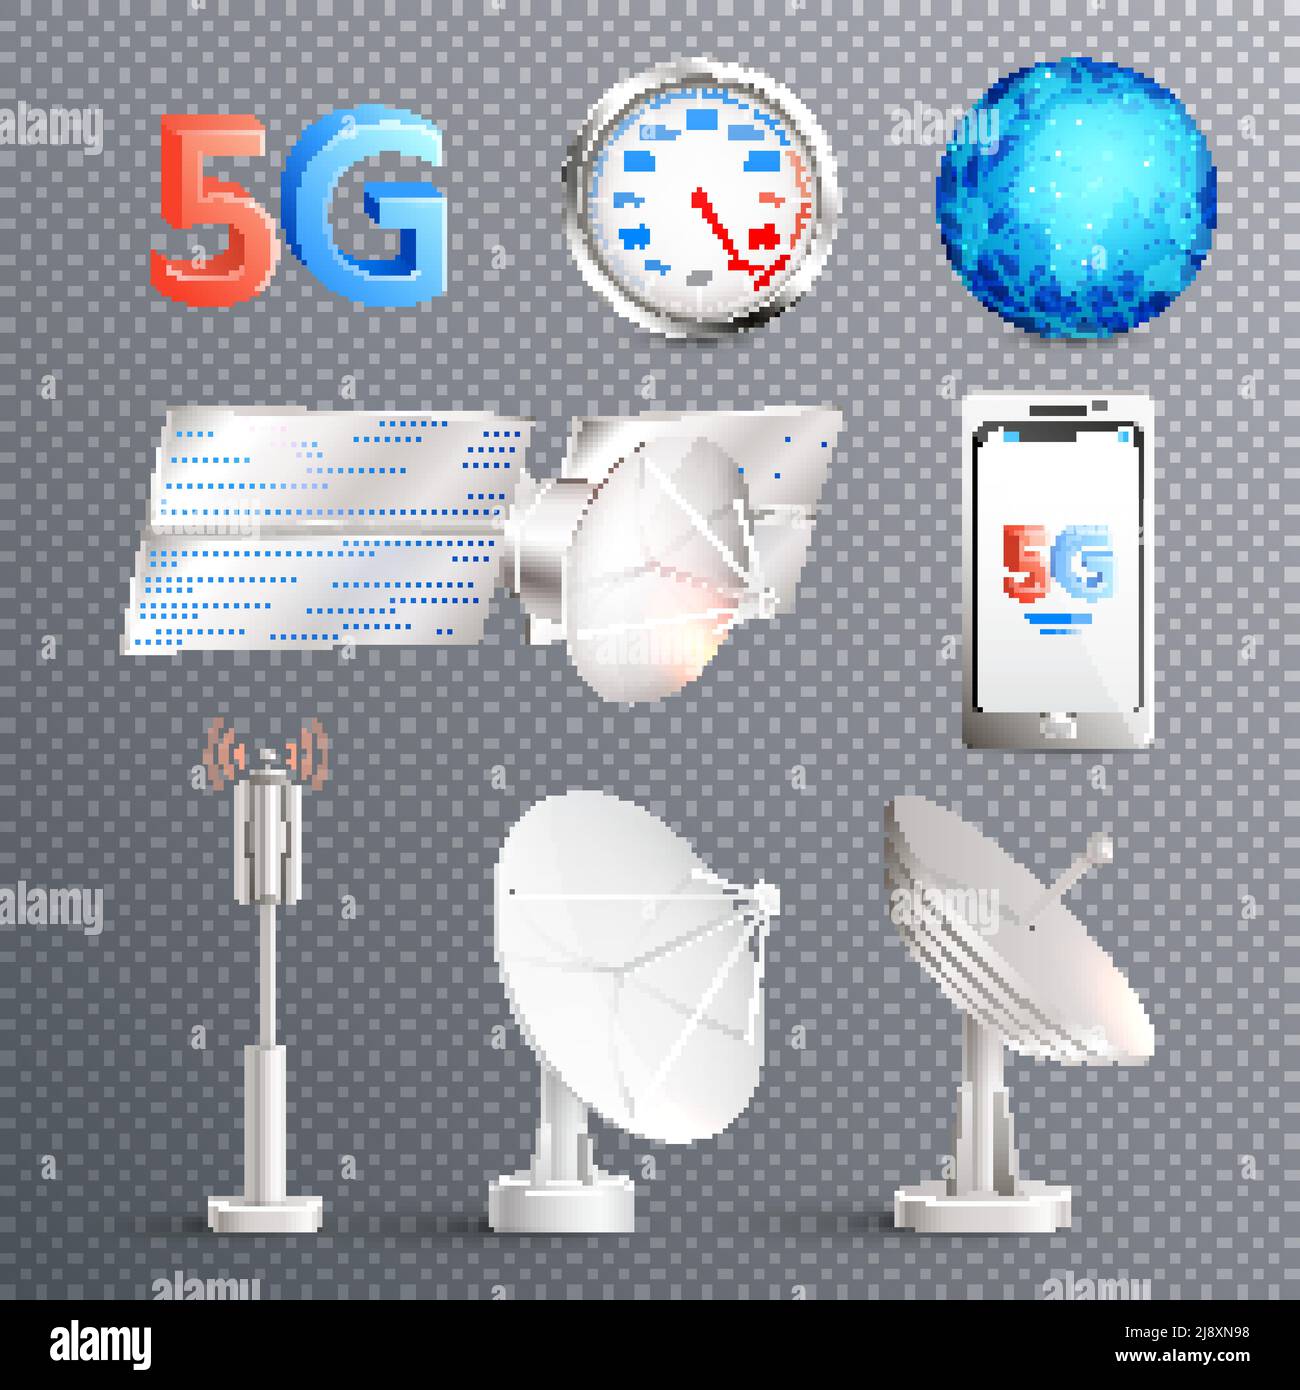 Modern mobile internet technology transparent set of isolated elements promoting signal transmission of 5g standard realistic vector illustration Stock Vector